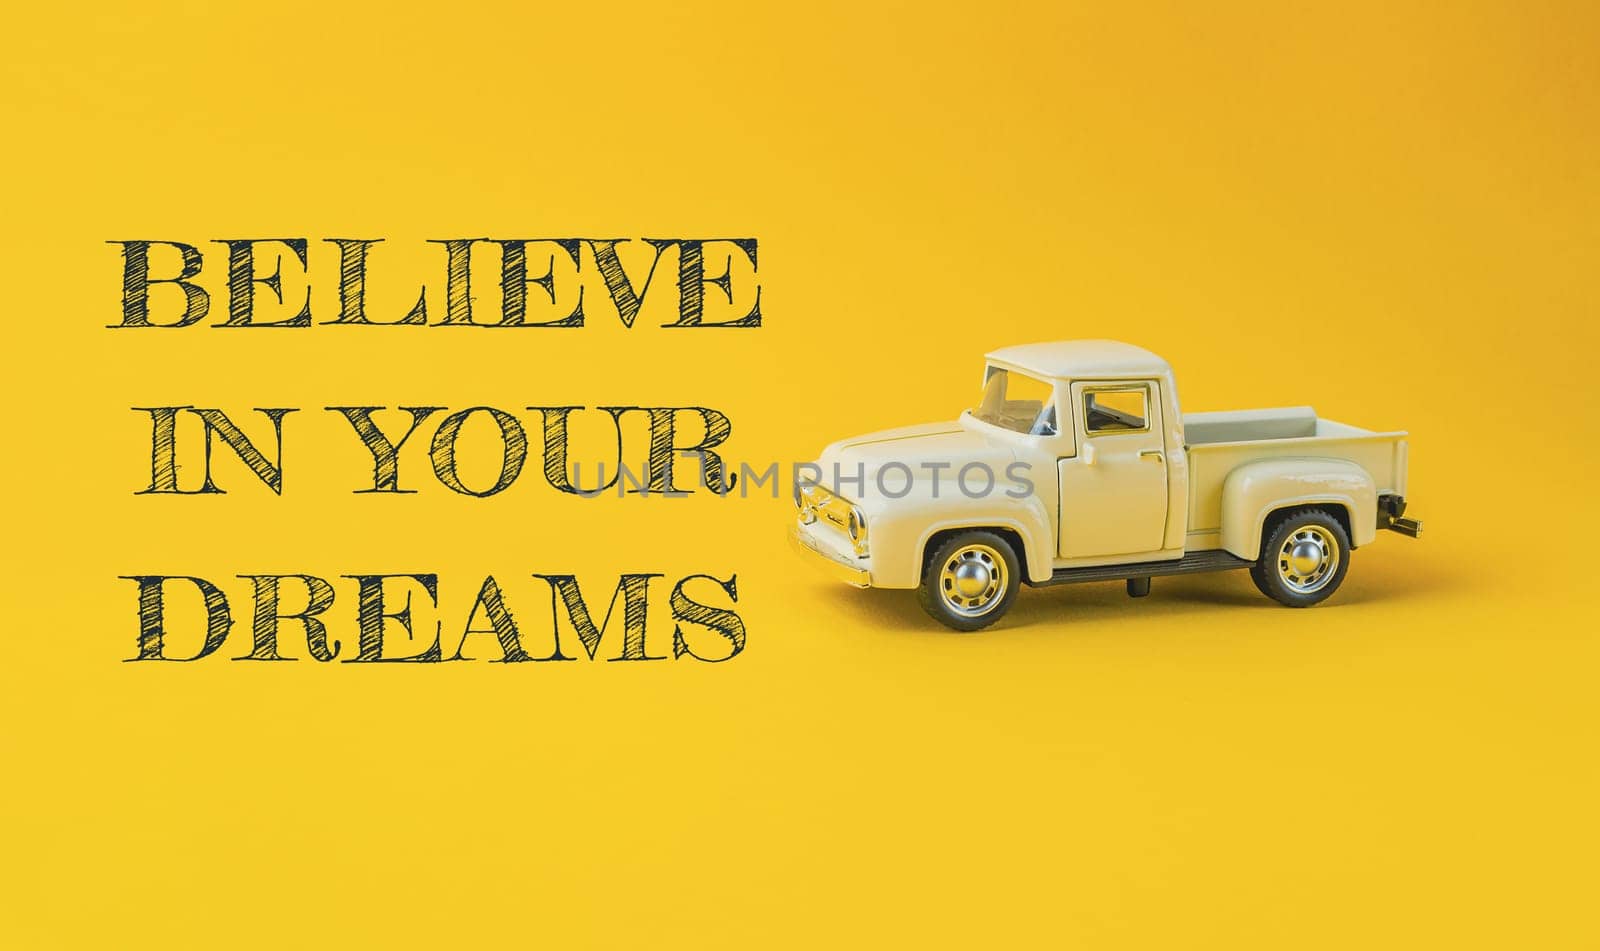 A toy truck is on a yellow background with the words believe in your dreams written below it